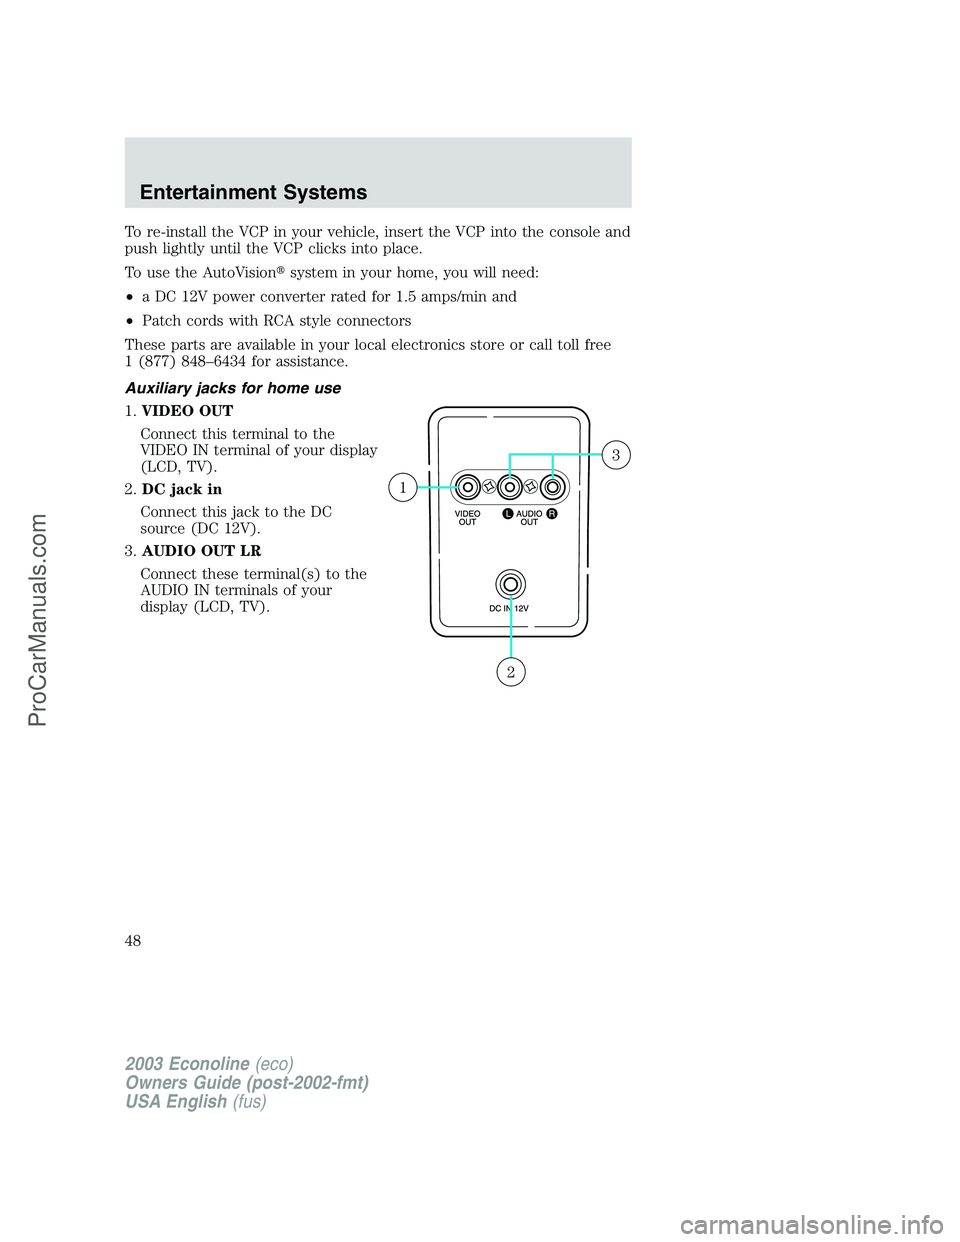 FORD E-450 2003  Owners Manual To re-install the VCP in your vehicle, insert the VCP into the console and
push lightly until the VCP clicks into place.
To use the AutoVisionsystem in your home, you will need:
•a DC 12V power con